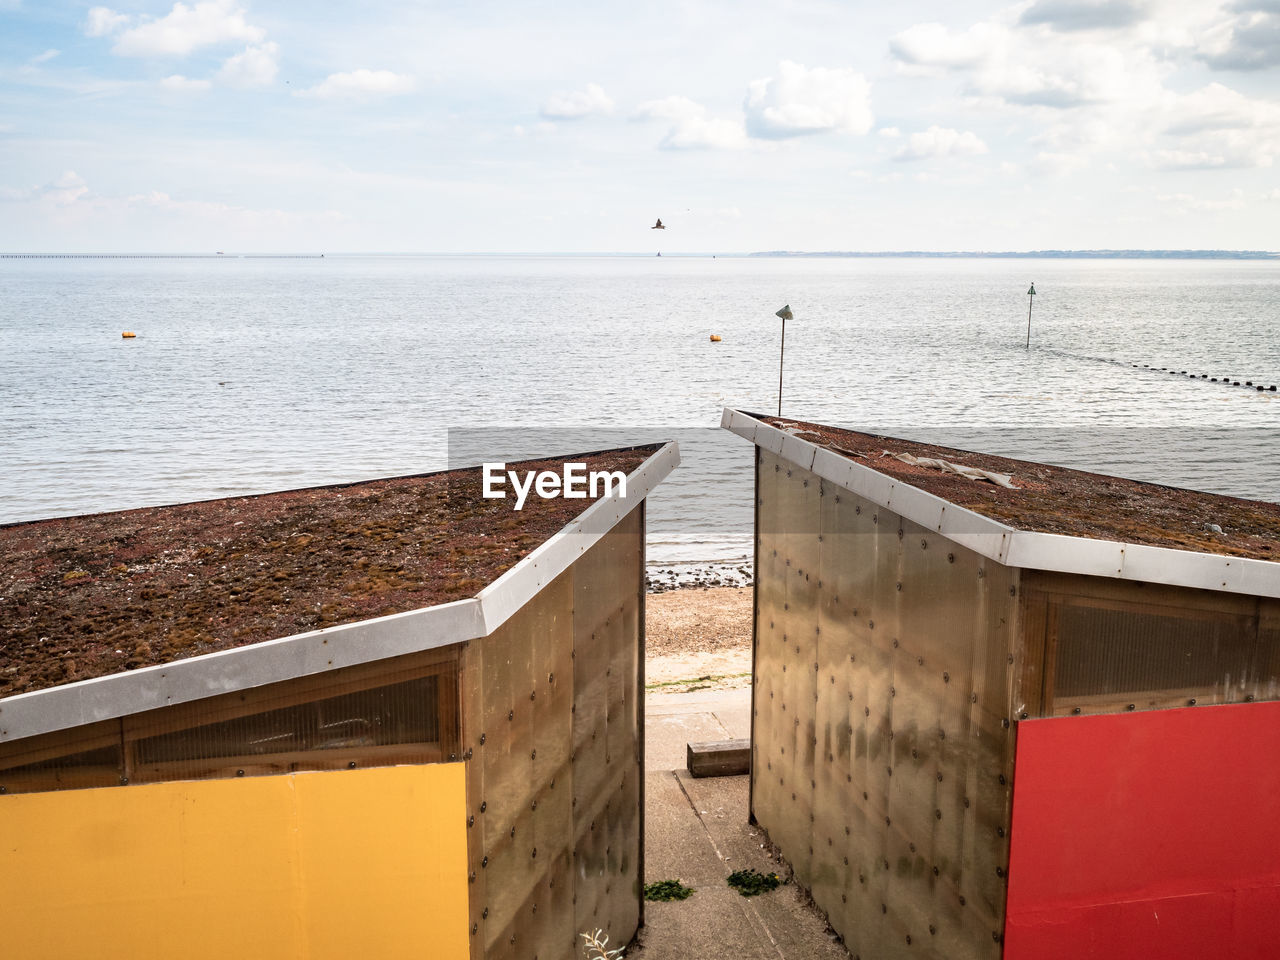 Beach huts with living roofs, and red and yellow panels on the beach at shoeburyness